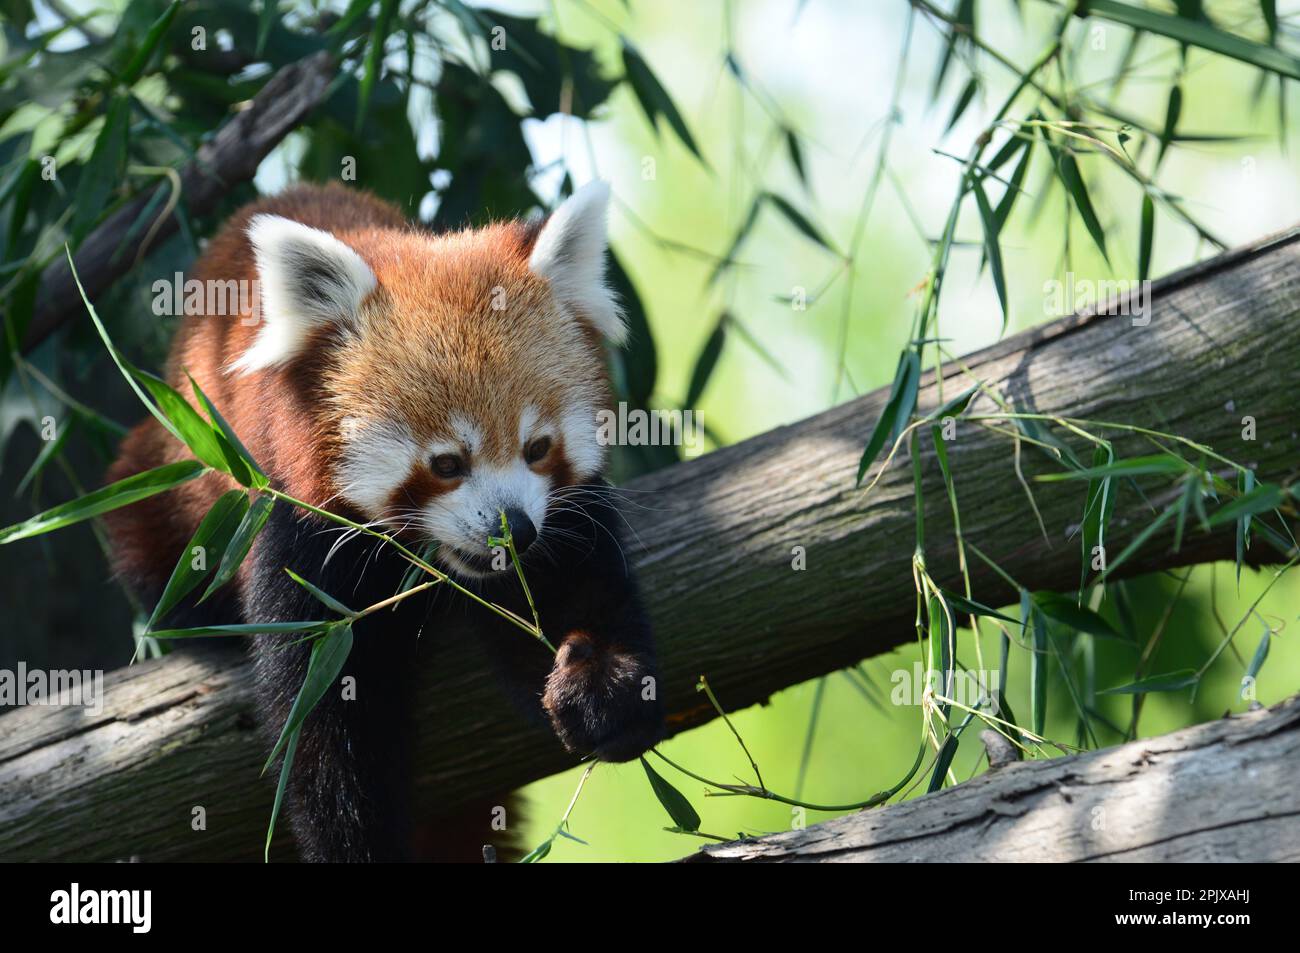 The red panda (Ailurus fulgens) is a mammal species native to the eastern Himalayas and southwestern China. Picture taken in captivity at Zoom, Cumian Stock Photo